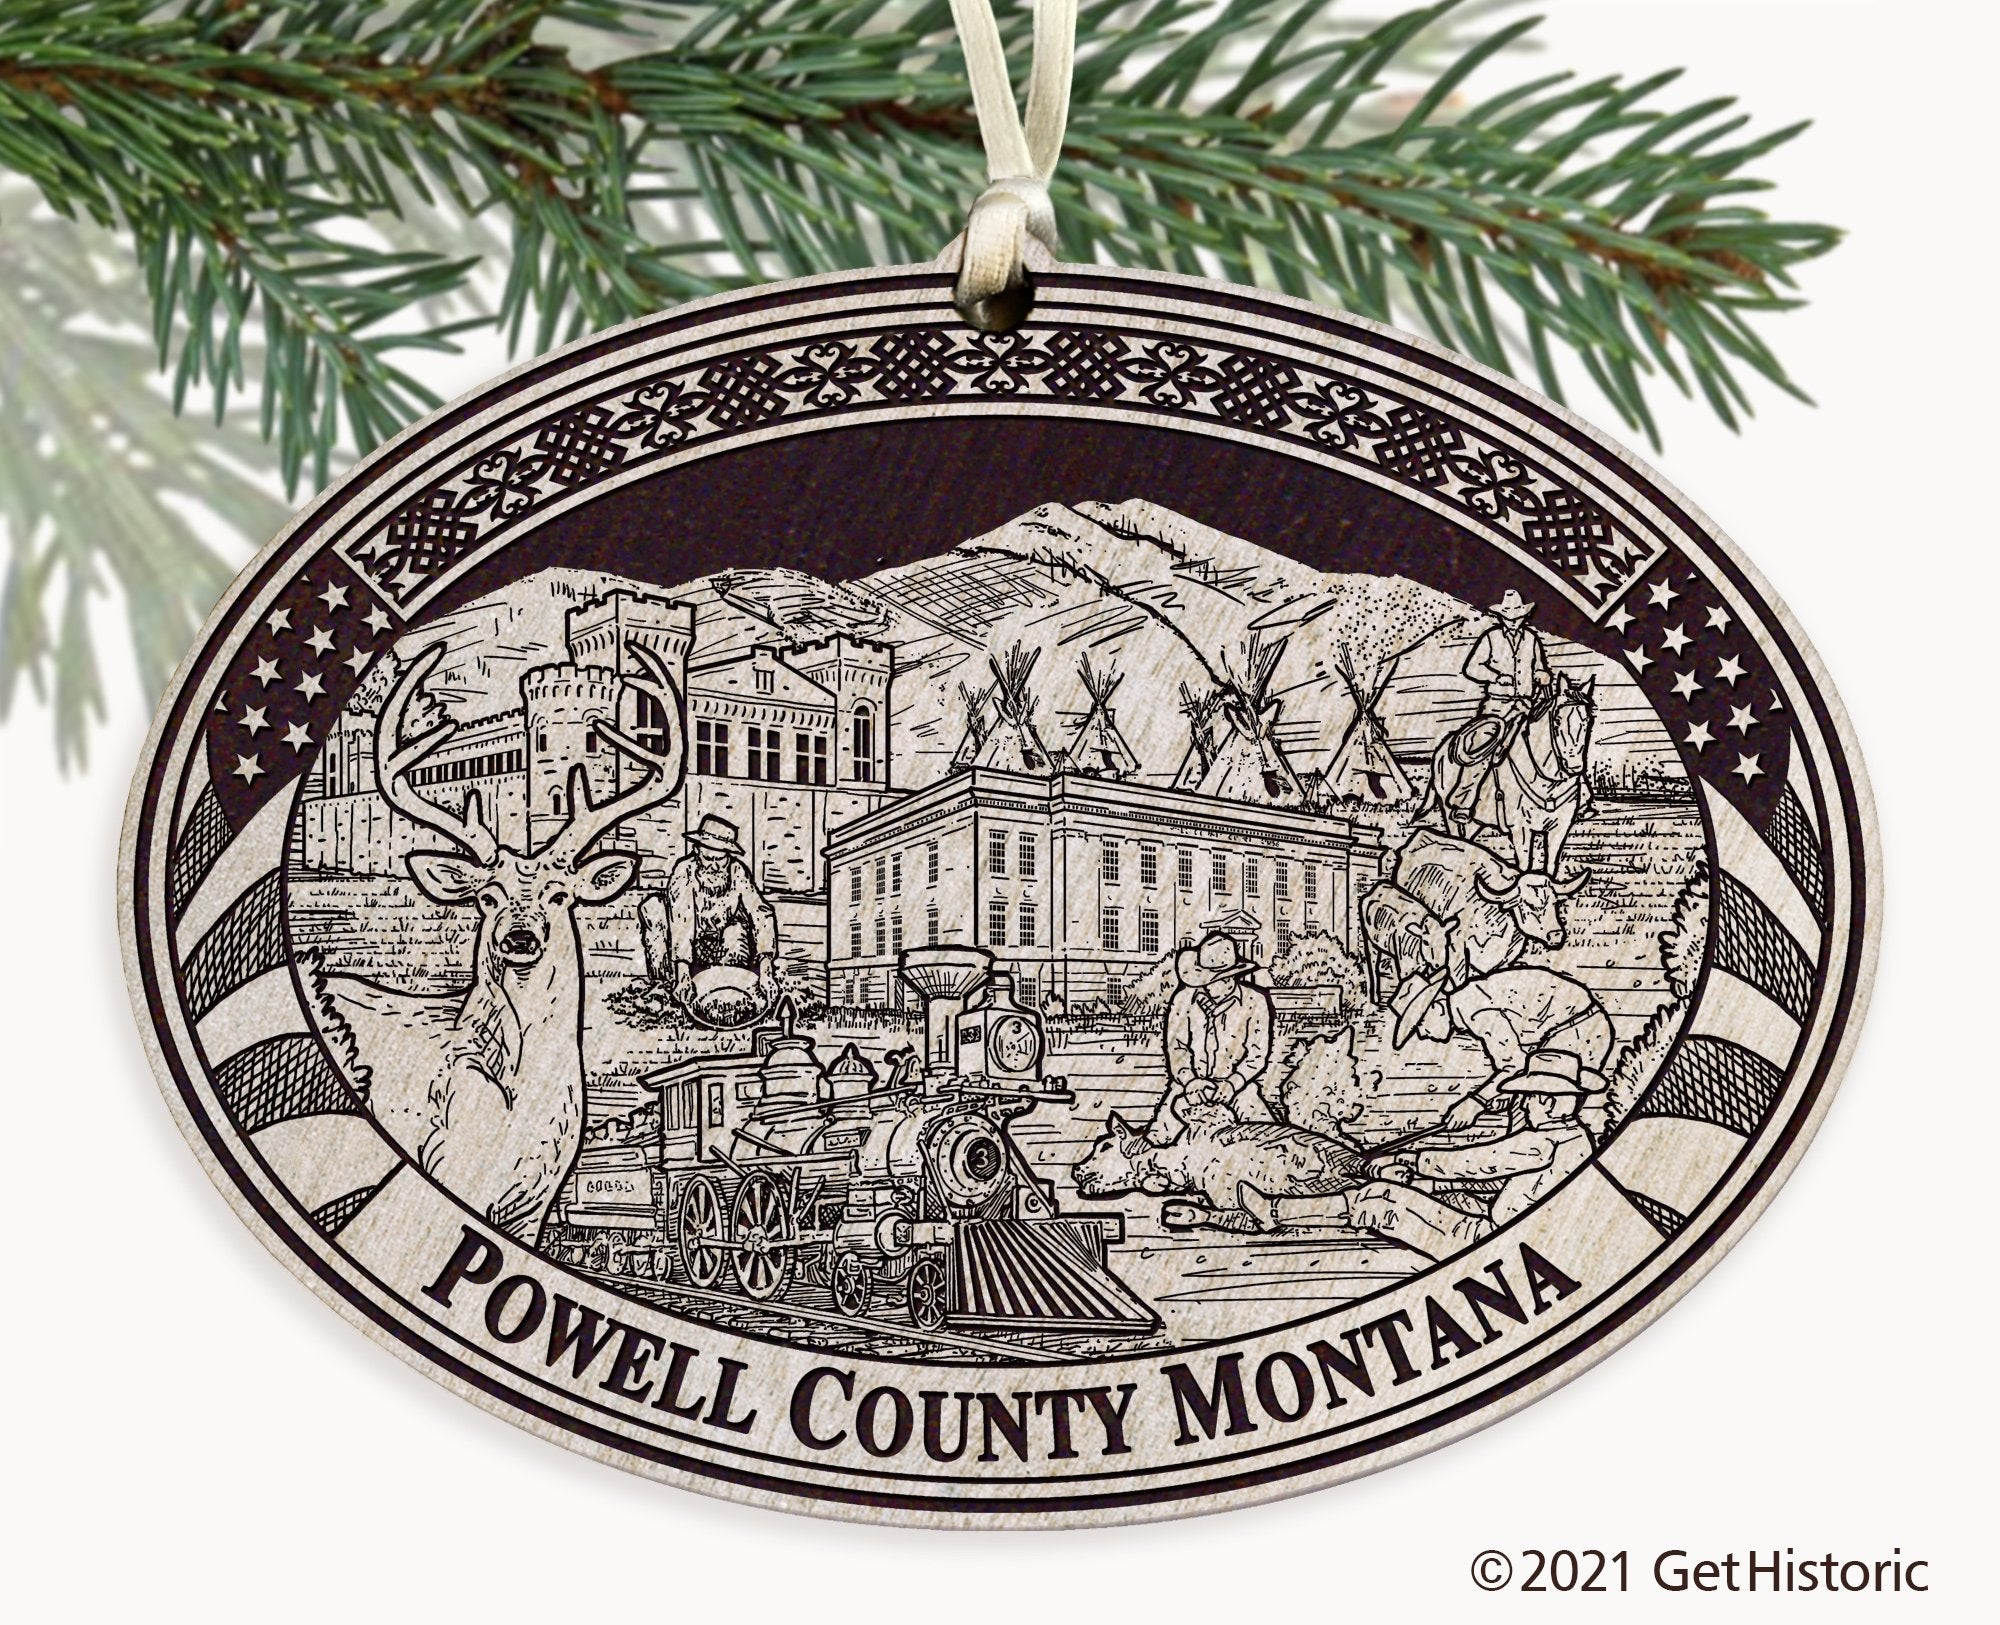 Powell County Montana Engraved Ornament